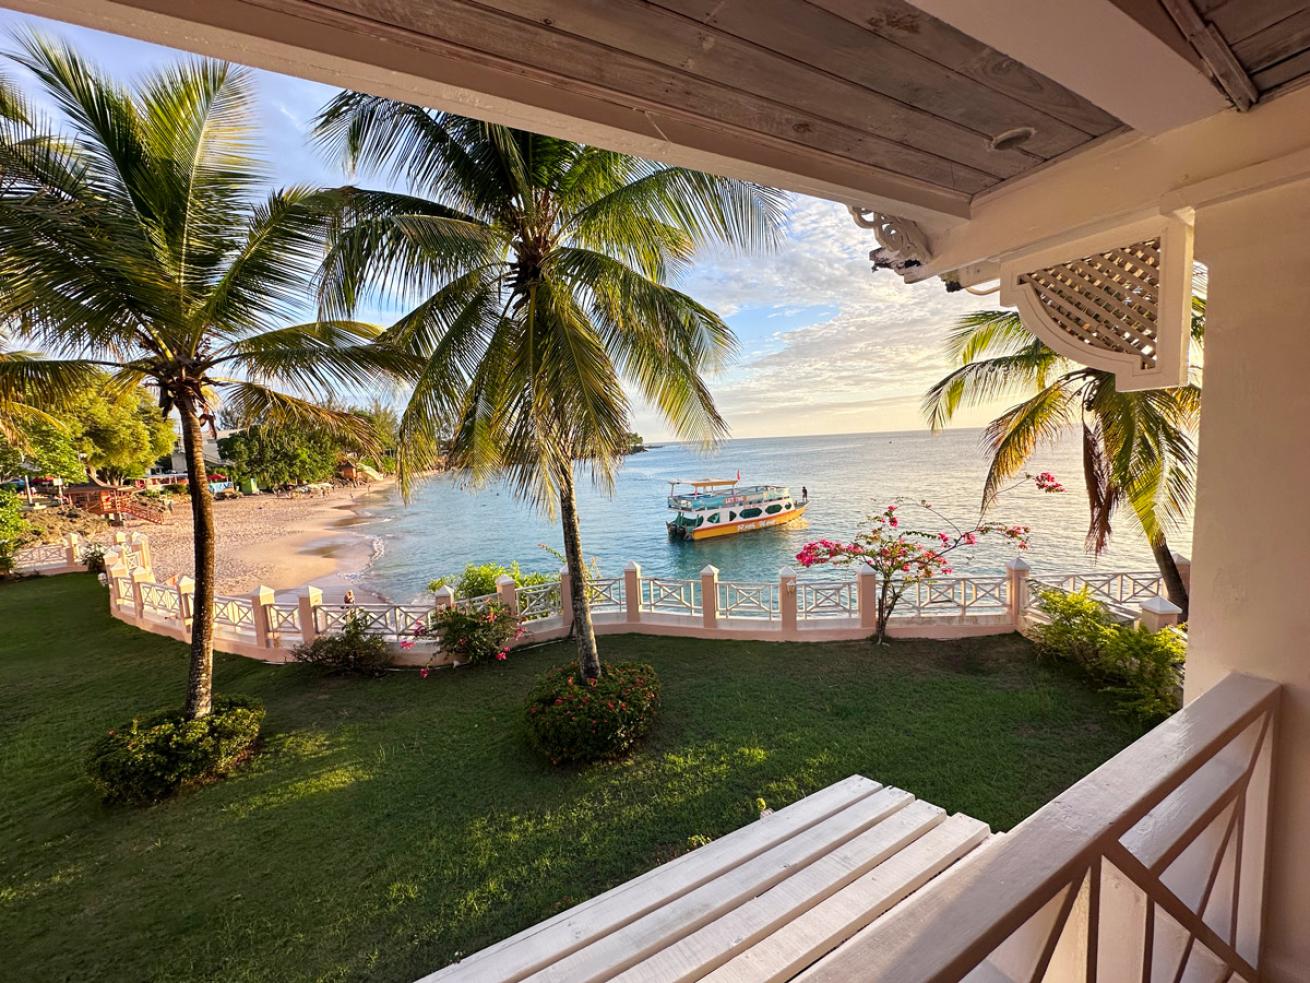 The view of Store Bay from Coco Reef Resort & Spa in Crown Point